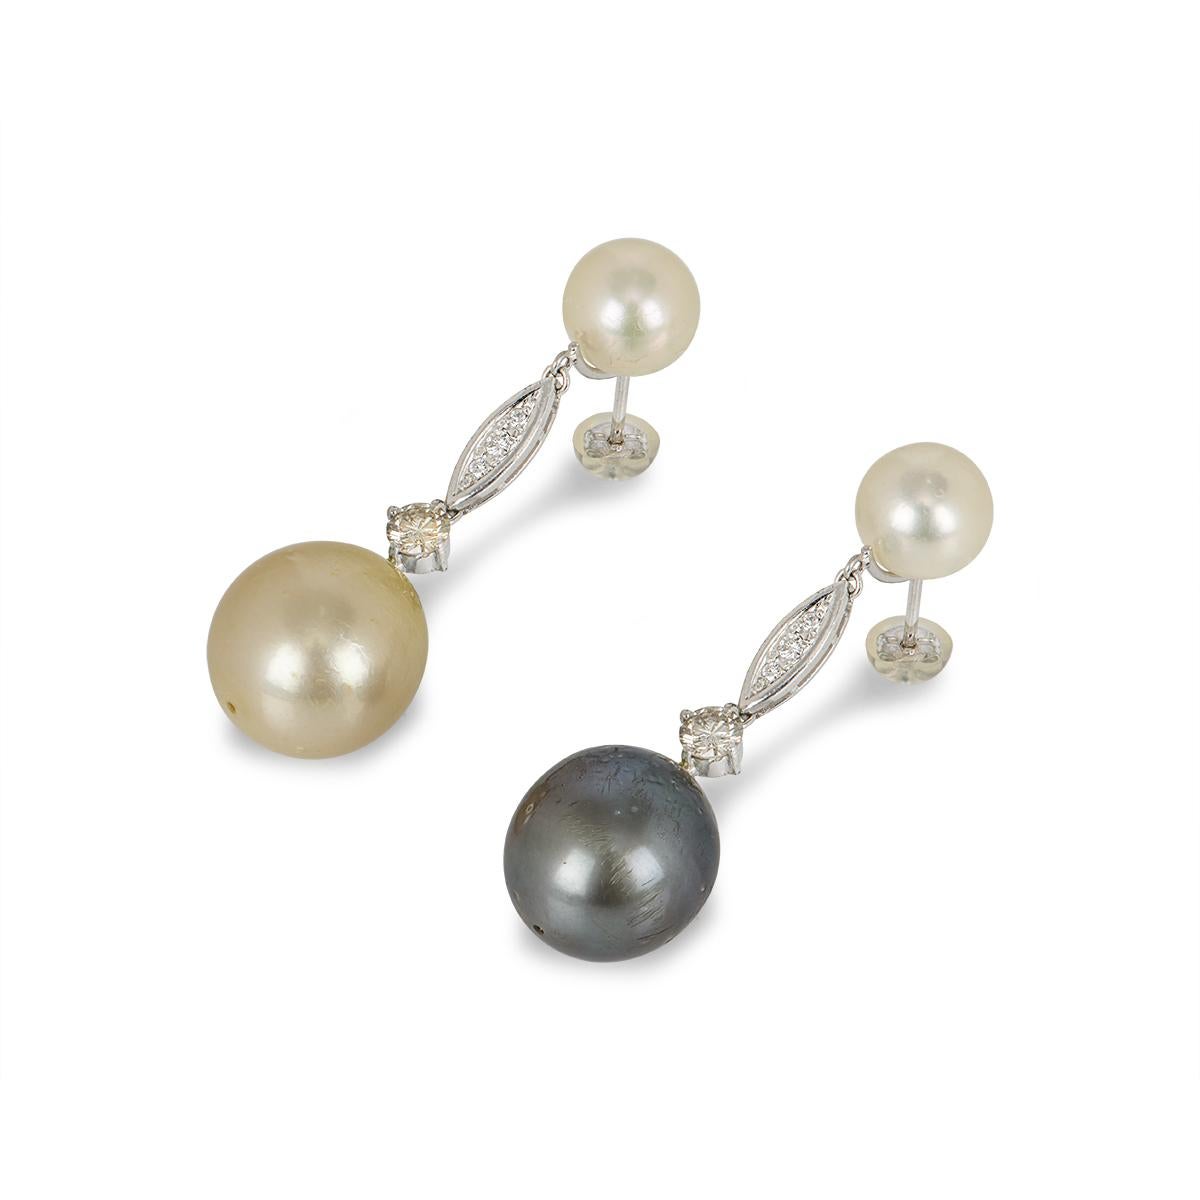 A pair of 18k white gold pearl and diamond drop earrings. Each earring is composed of a 9mm white pearl from which has a pave set diamond detailing that leads to a single round brilliant cut diamond. Suspended from the single diamond is a larger